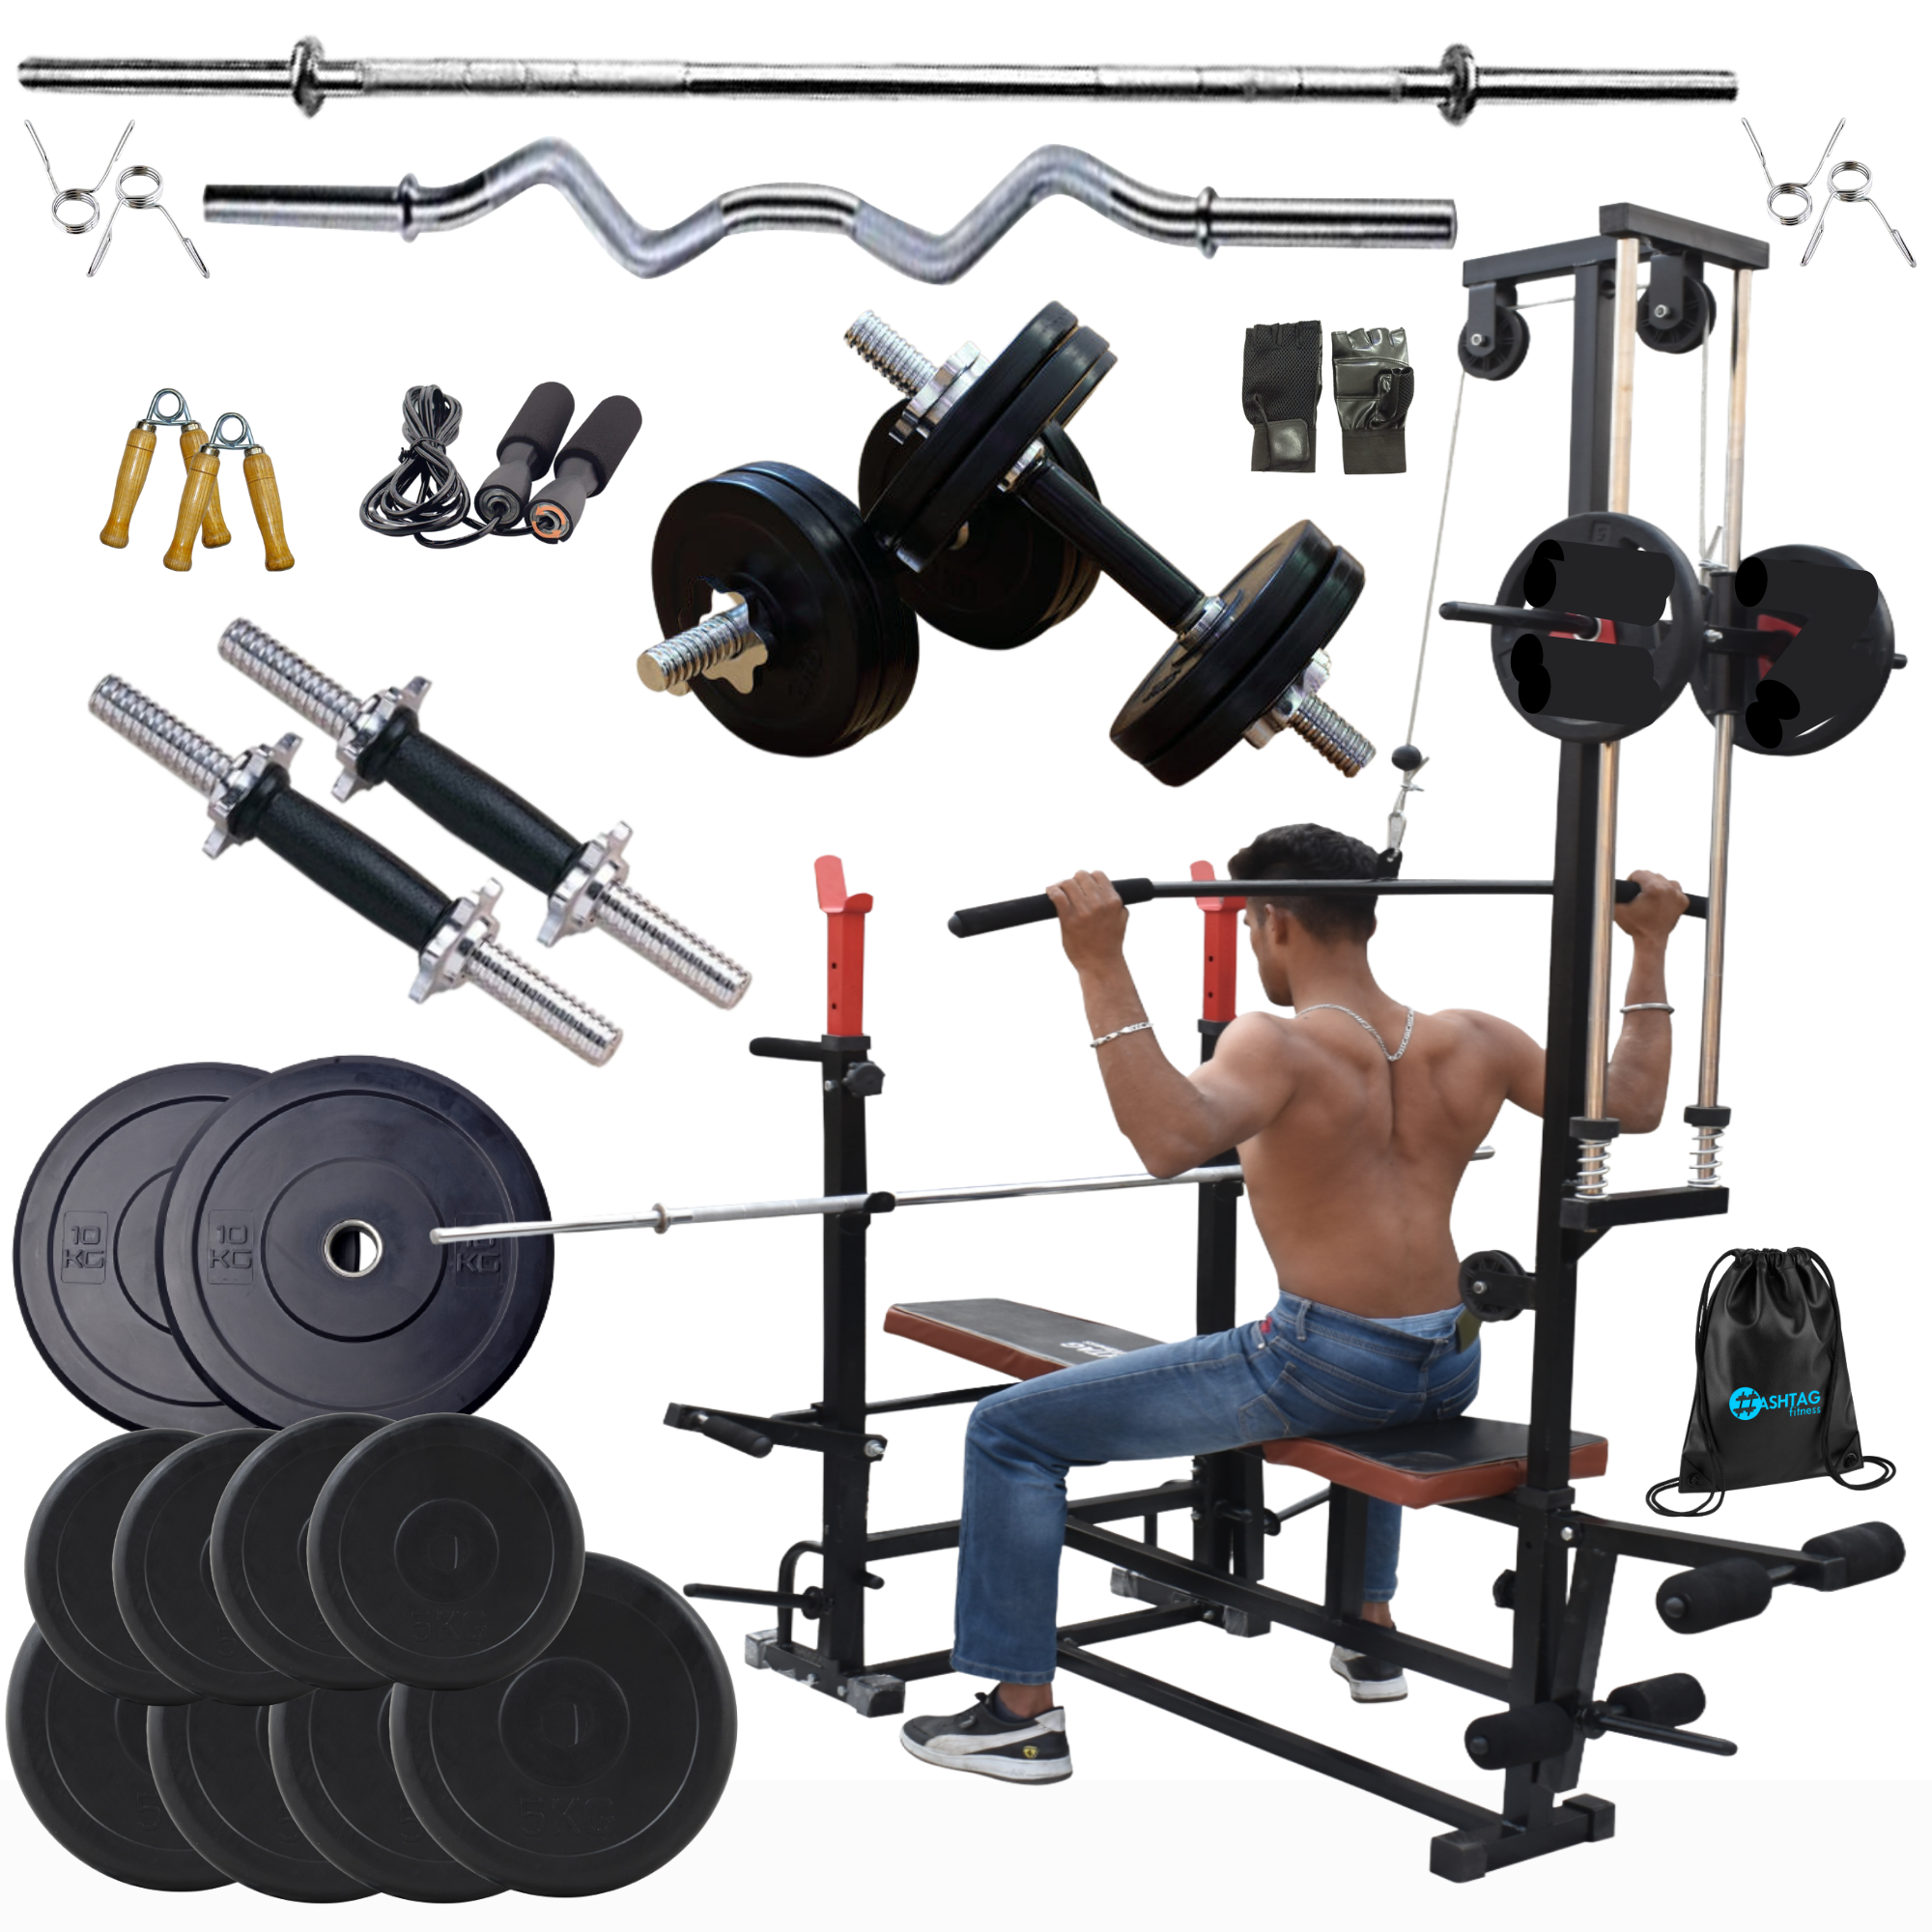 HASHTAG FITNESS 20 in 1 Bench with 50kg steel weight Home Gym & Fitness kit